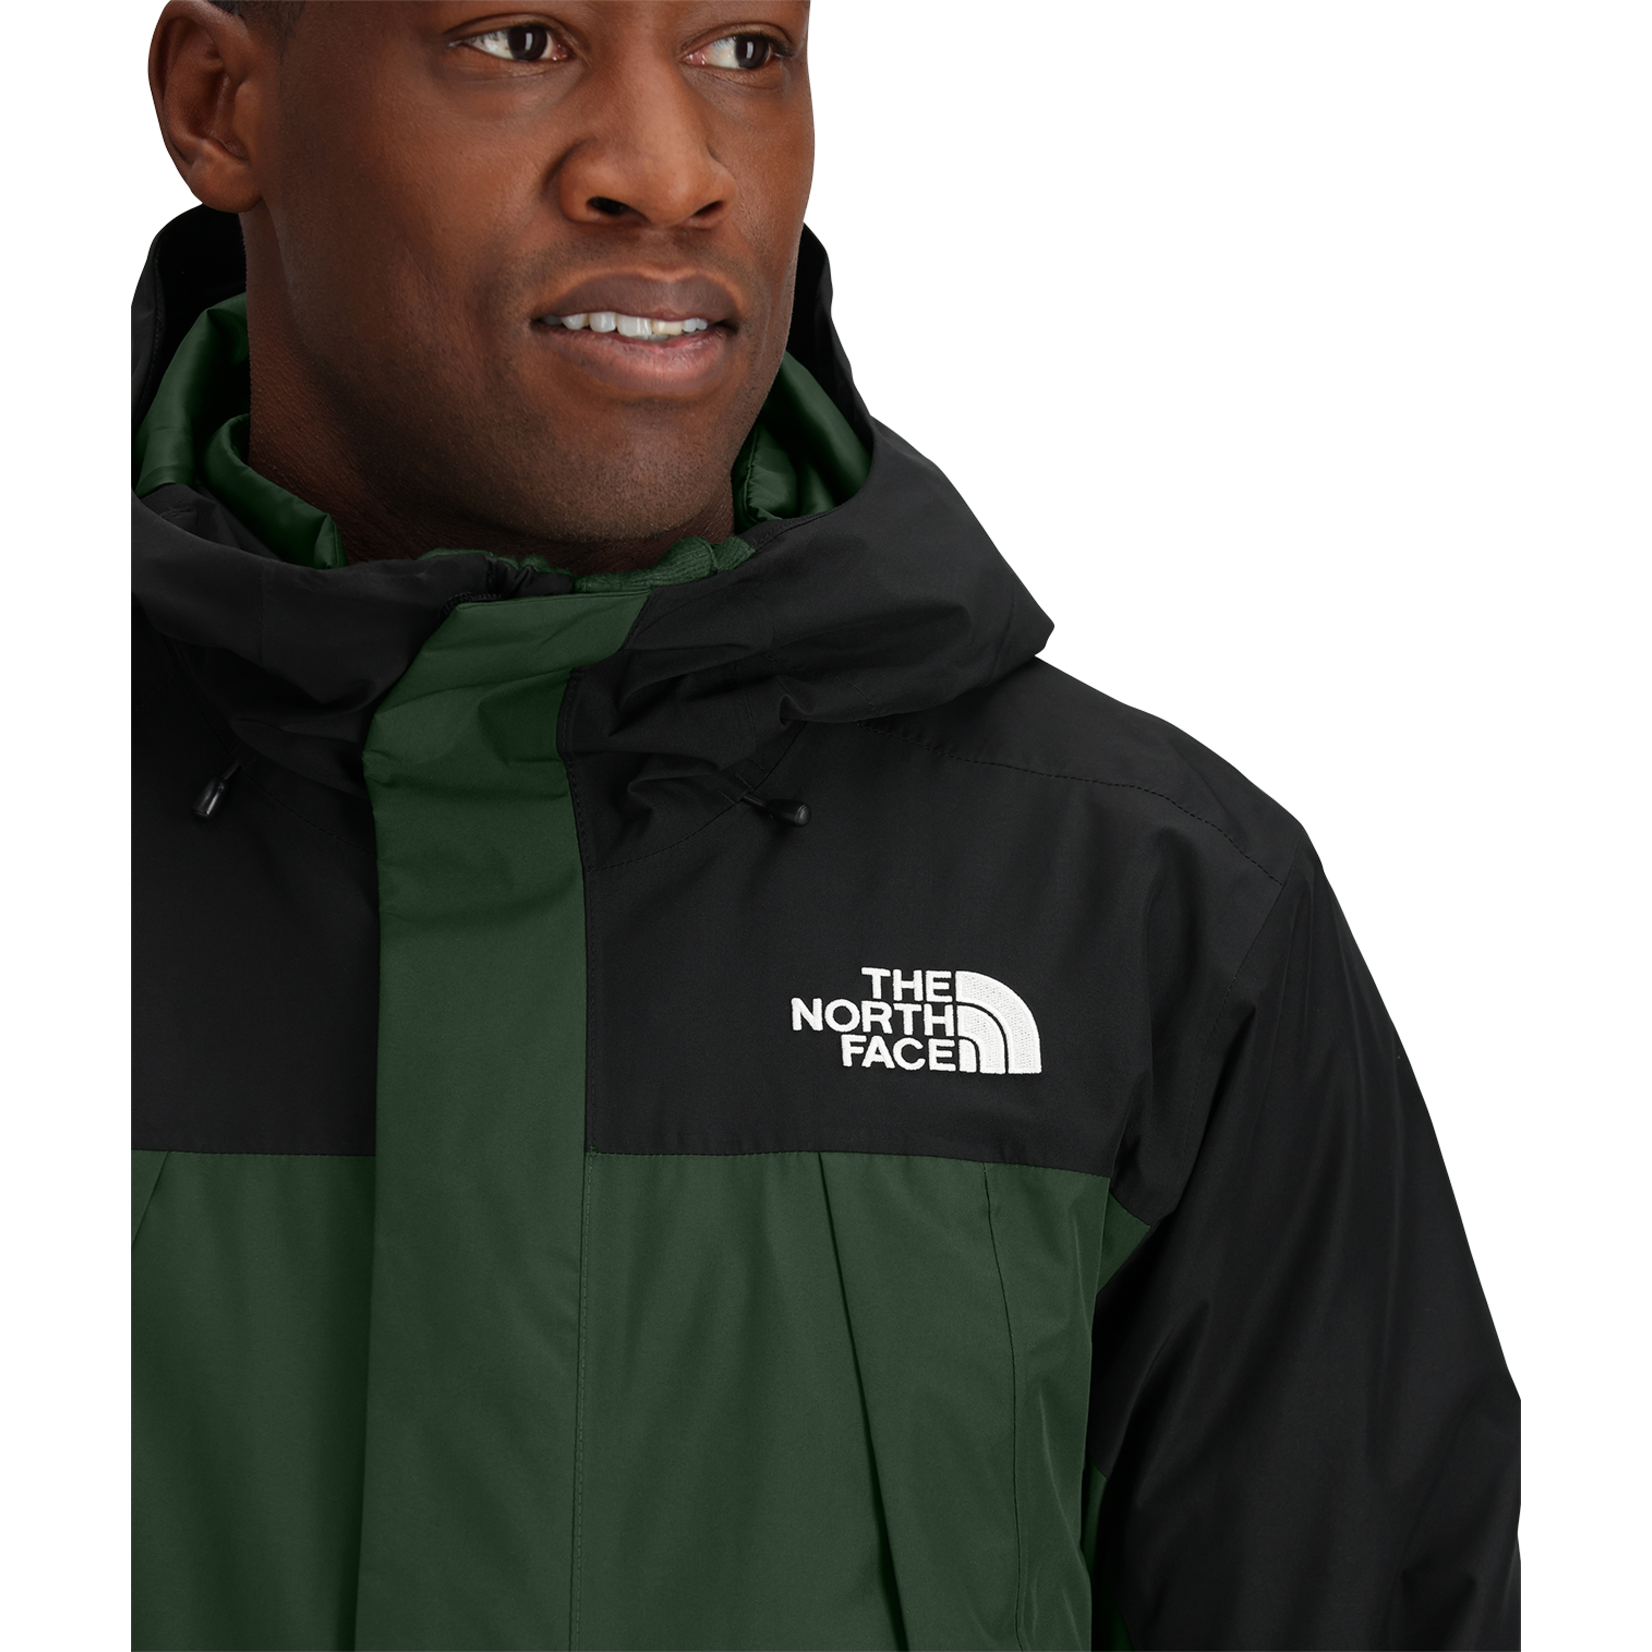 The North Face Men's Clement Triclimate Jacket for Sale - Ski